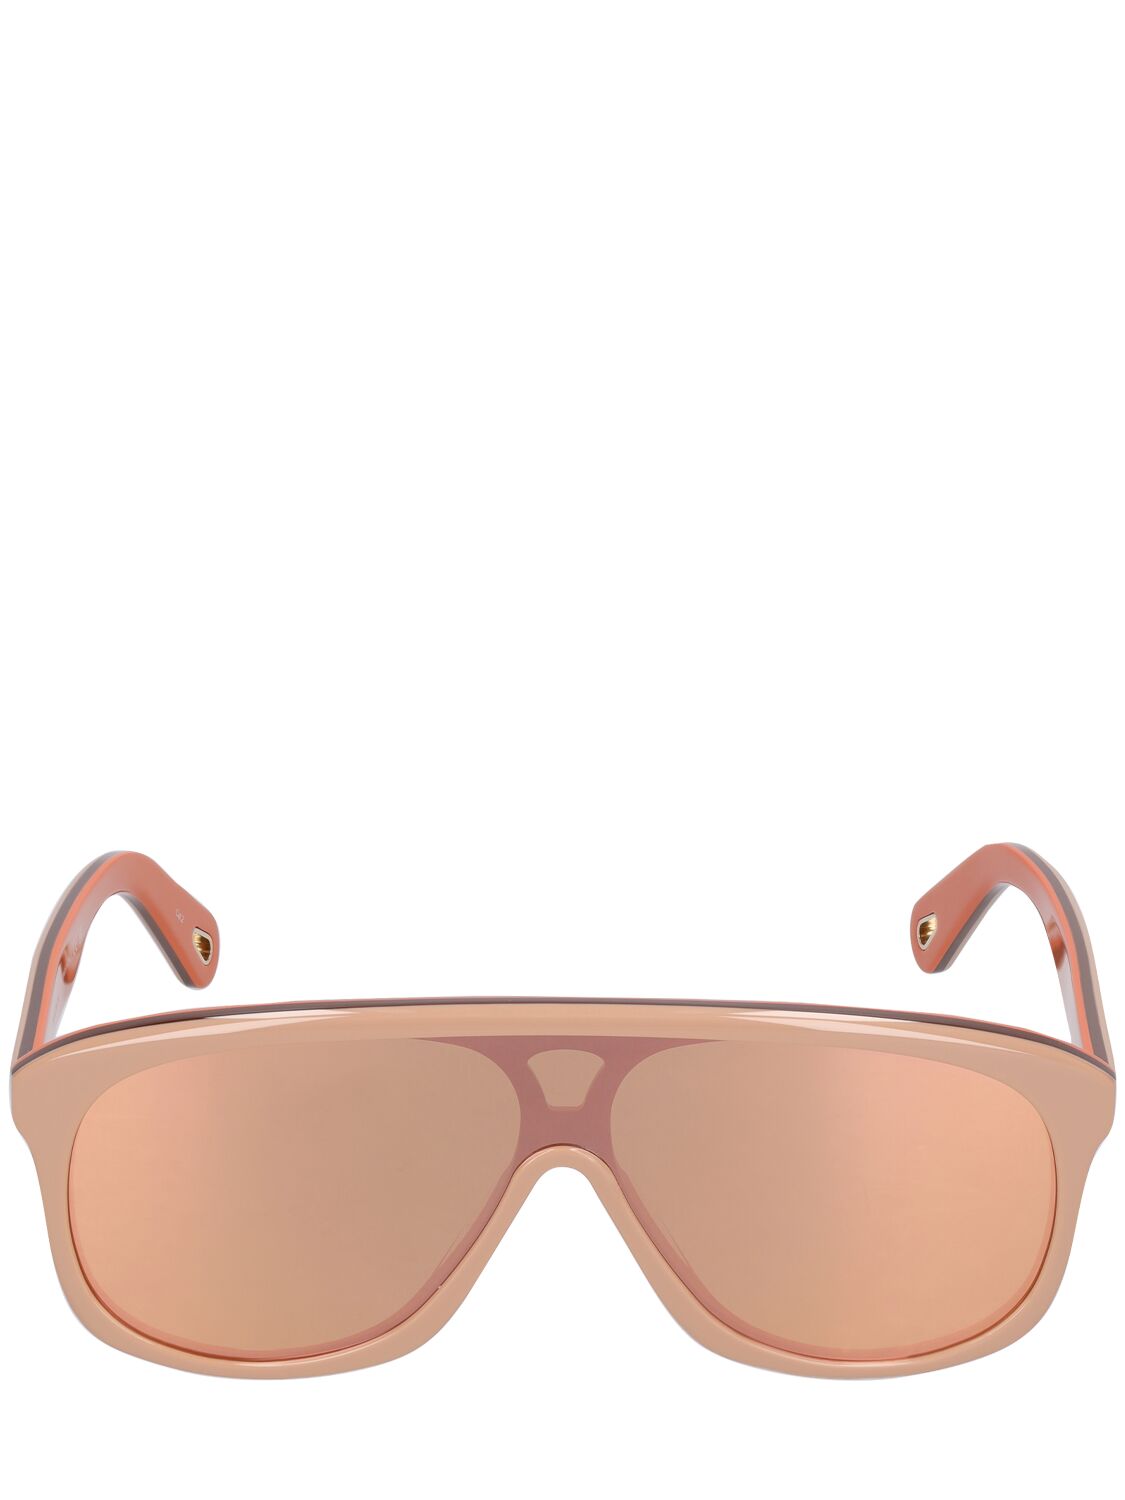 Chloé Mountaineering After Ski Sunglasses In Beige,brown